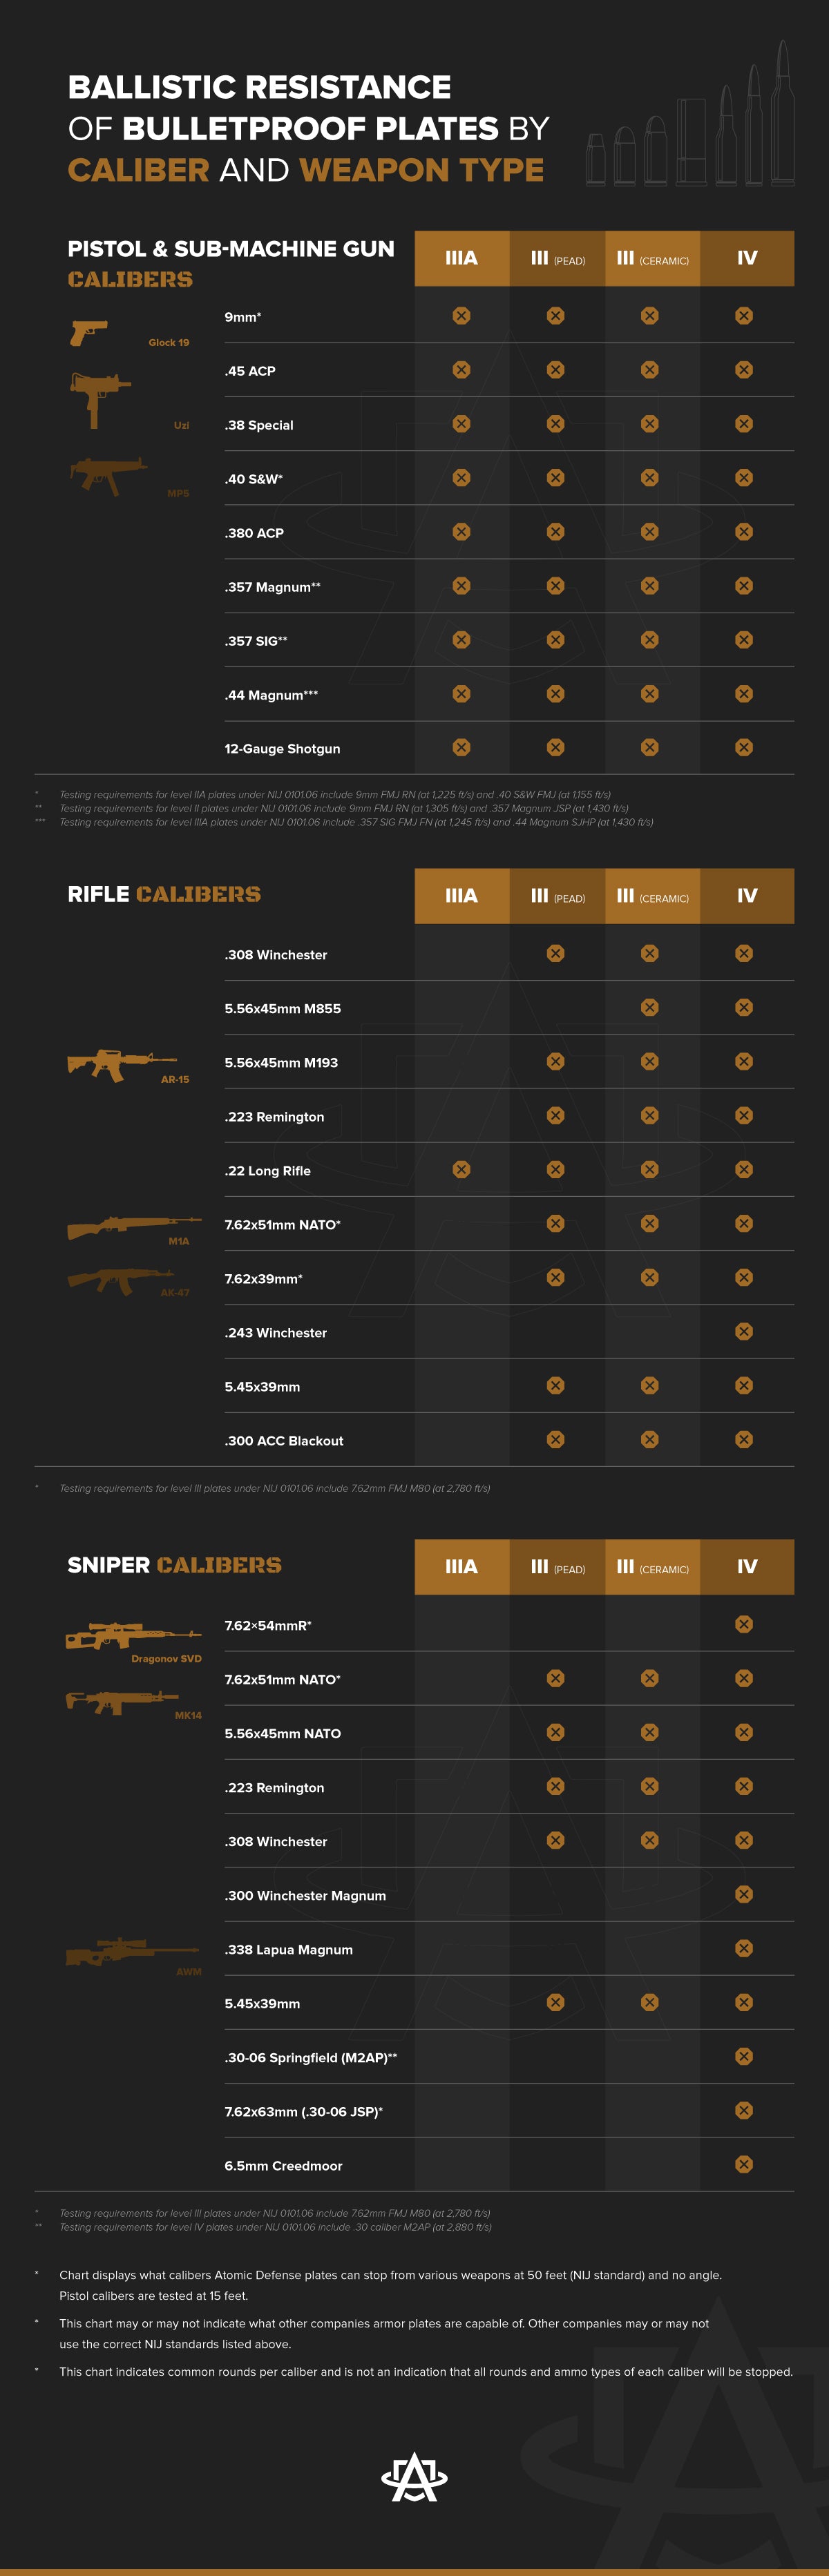 Ballistic Resistance of Bulletproof Plates by Caliber and Weapon Type